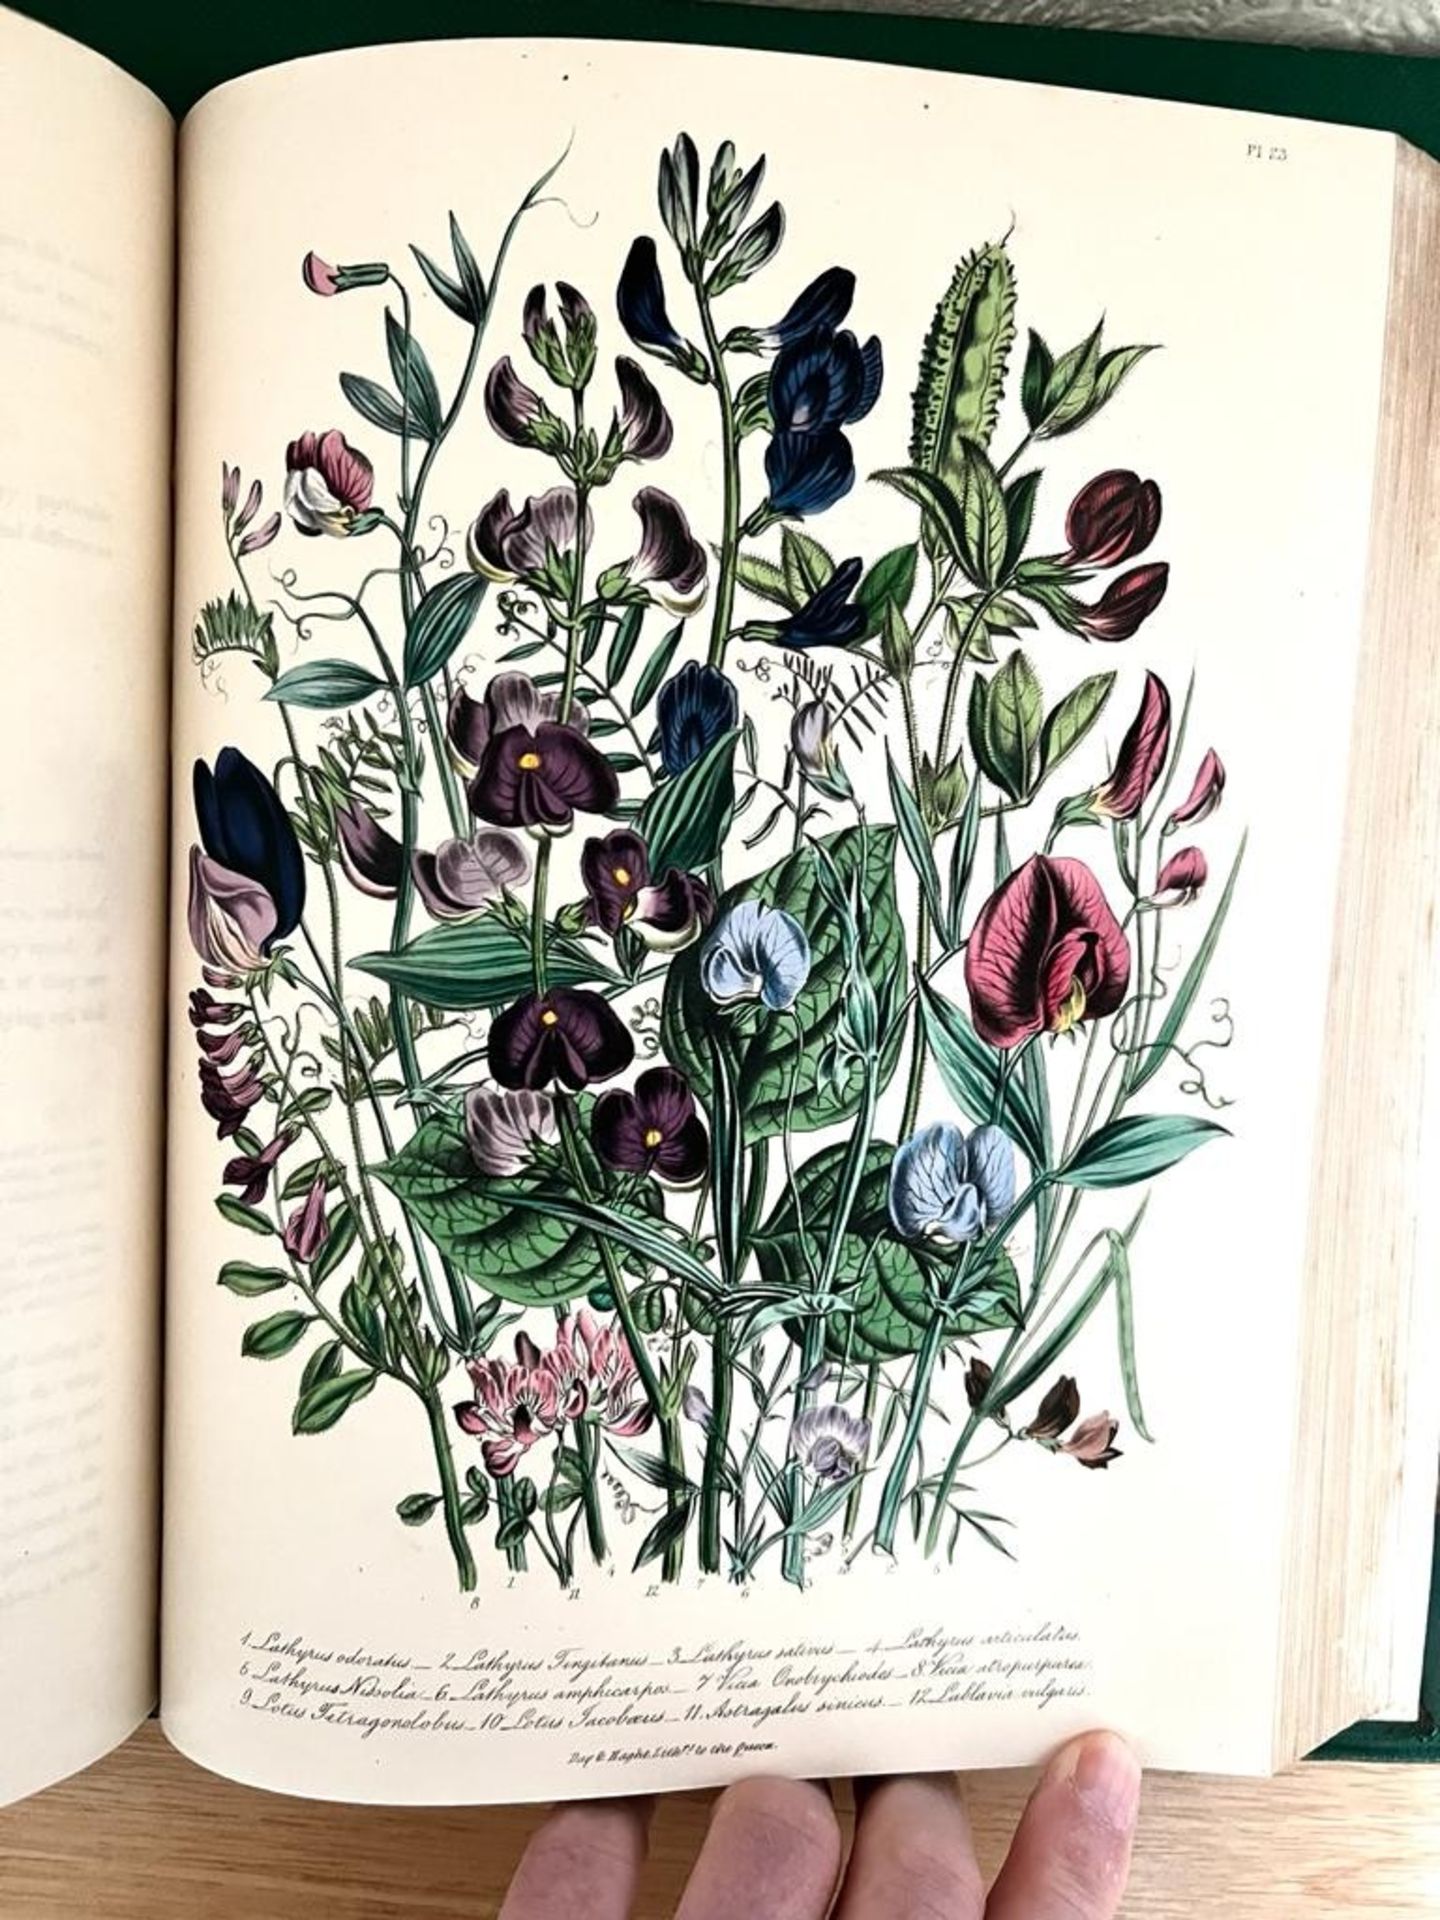 MRS JANE LOUDON, 'THE LADIES FLOWER GARDEN OF ORNAMENTAL ANNUALS', 1840 - Image 7 of 8